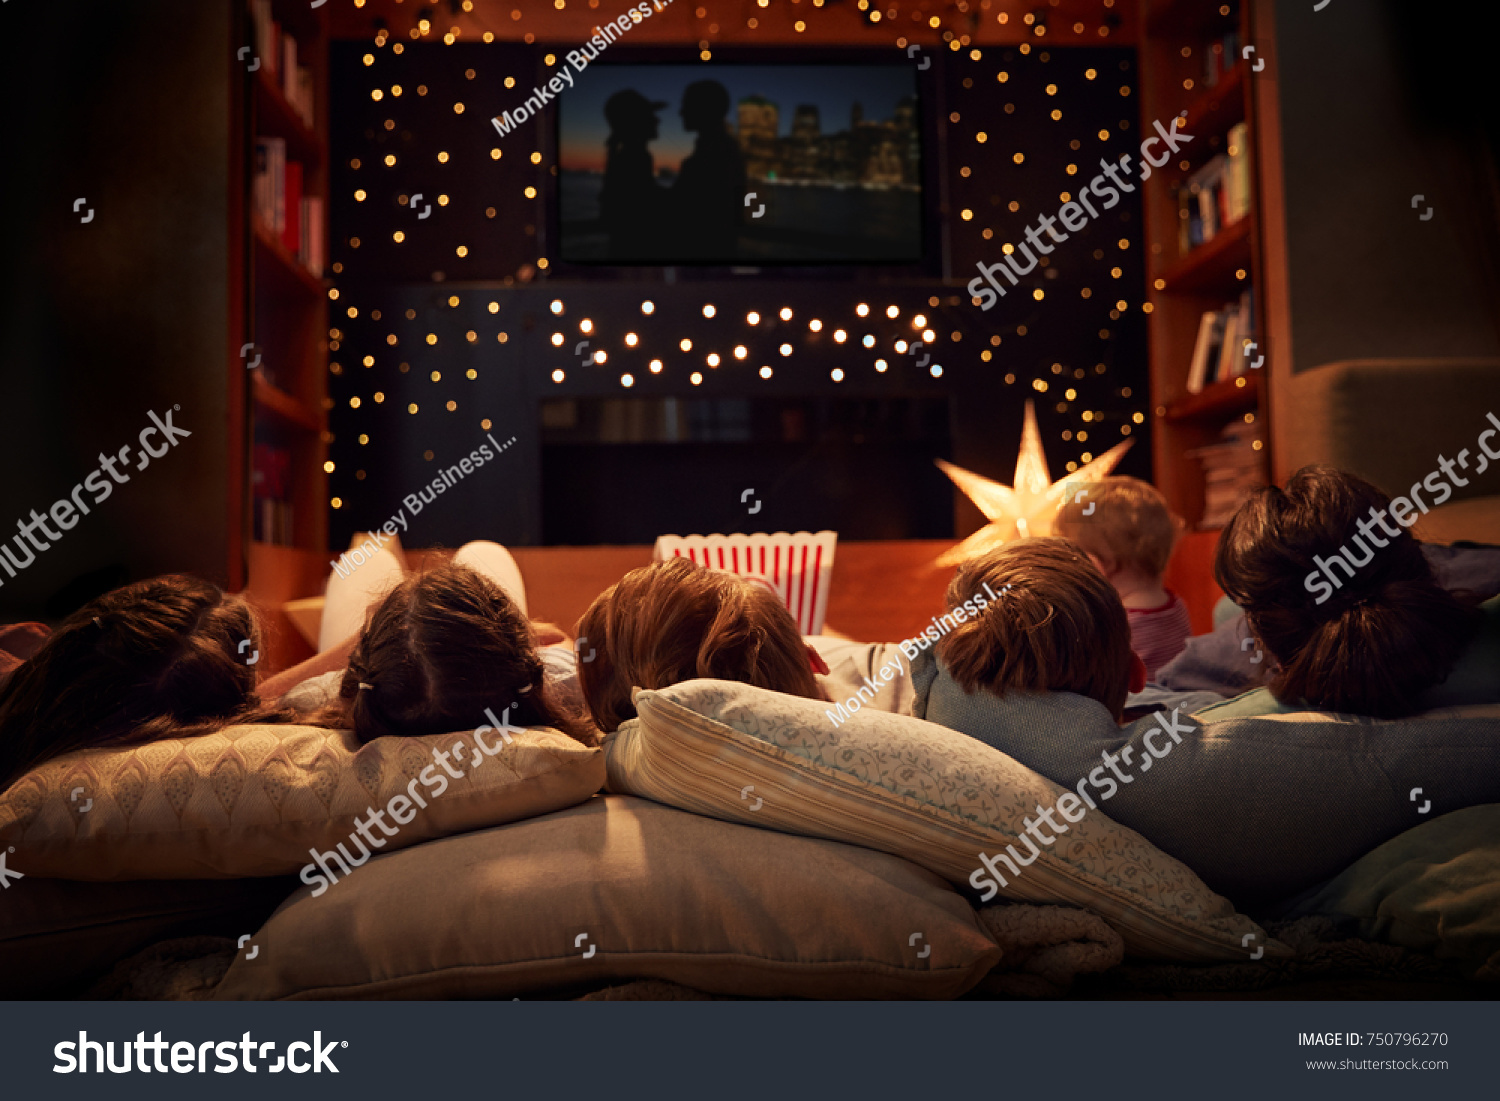 Family Enjoying Movie Night At Home Together #750796270